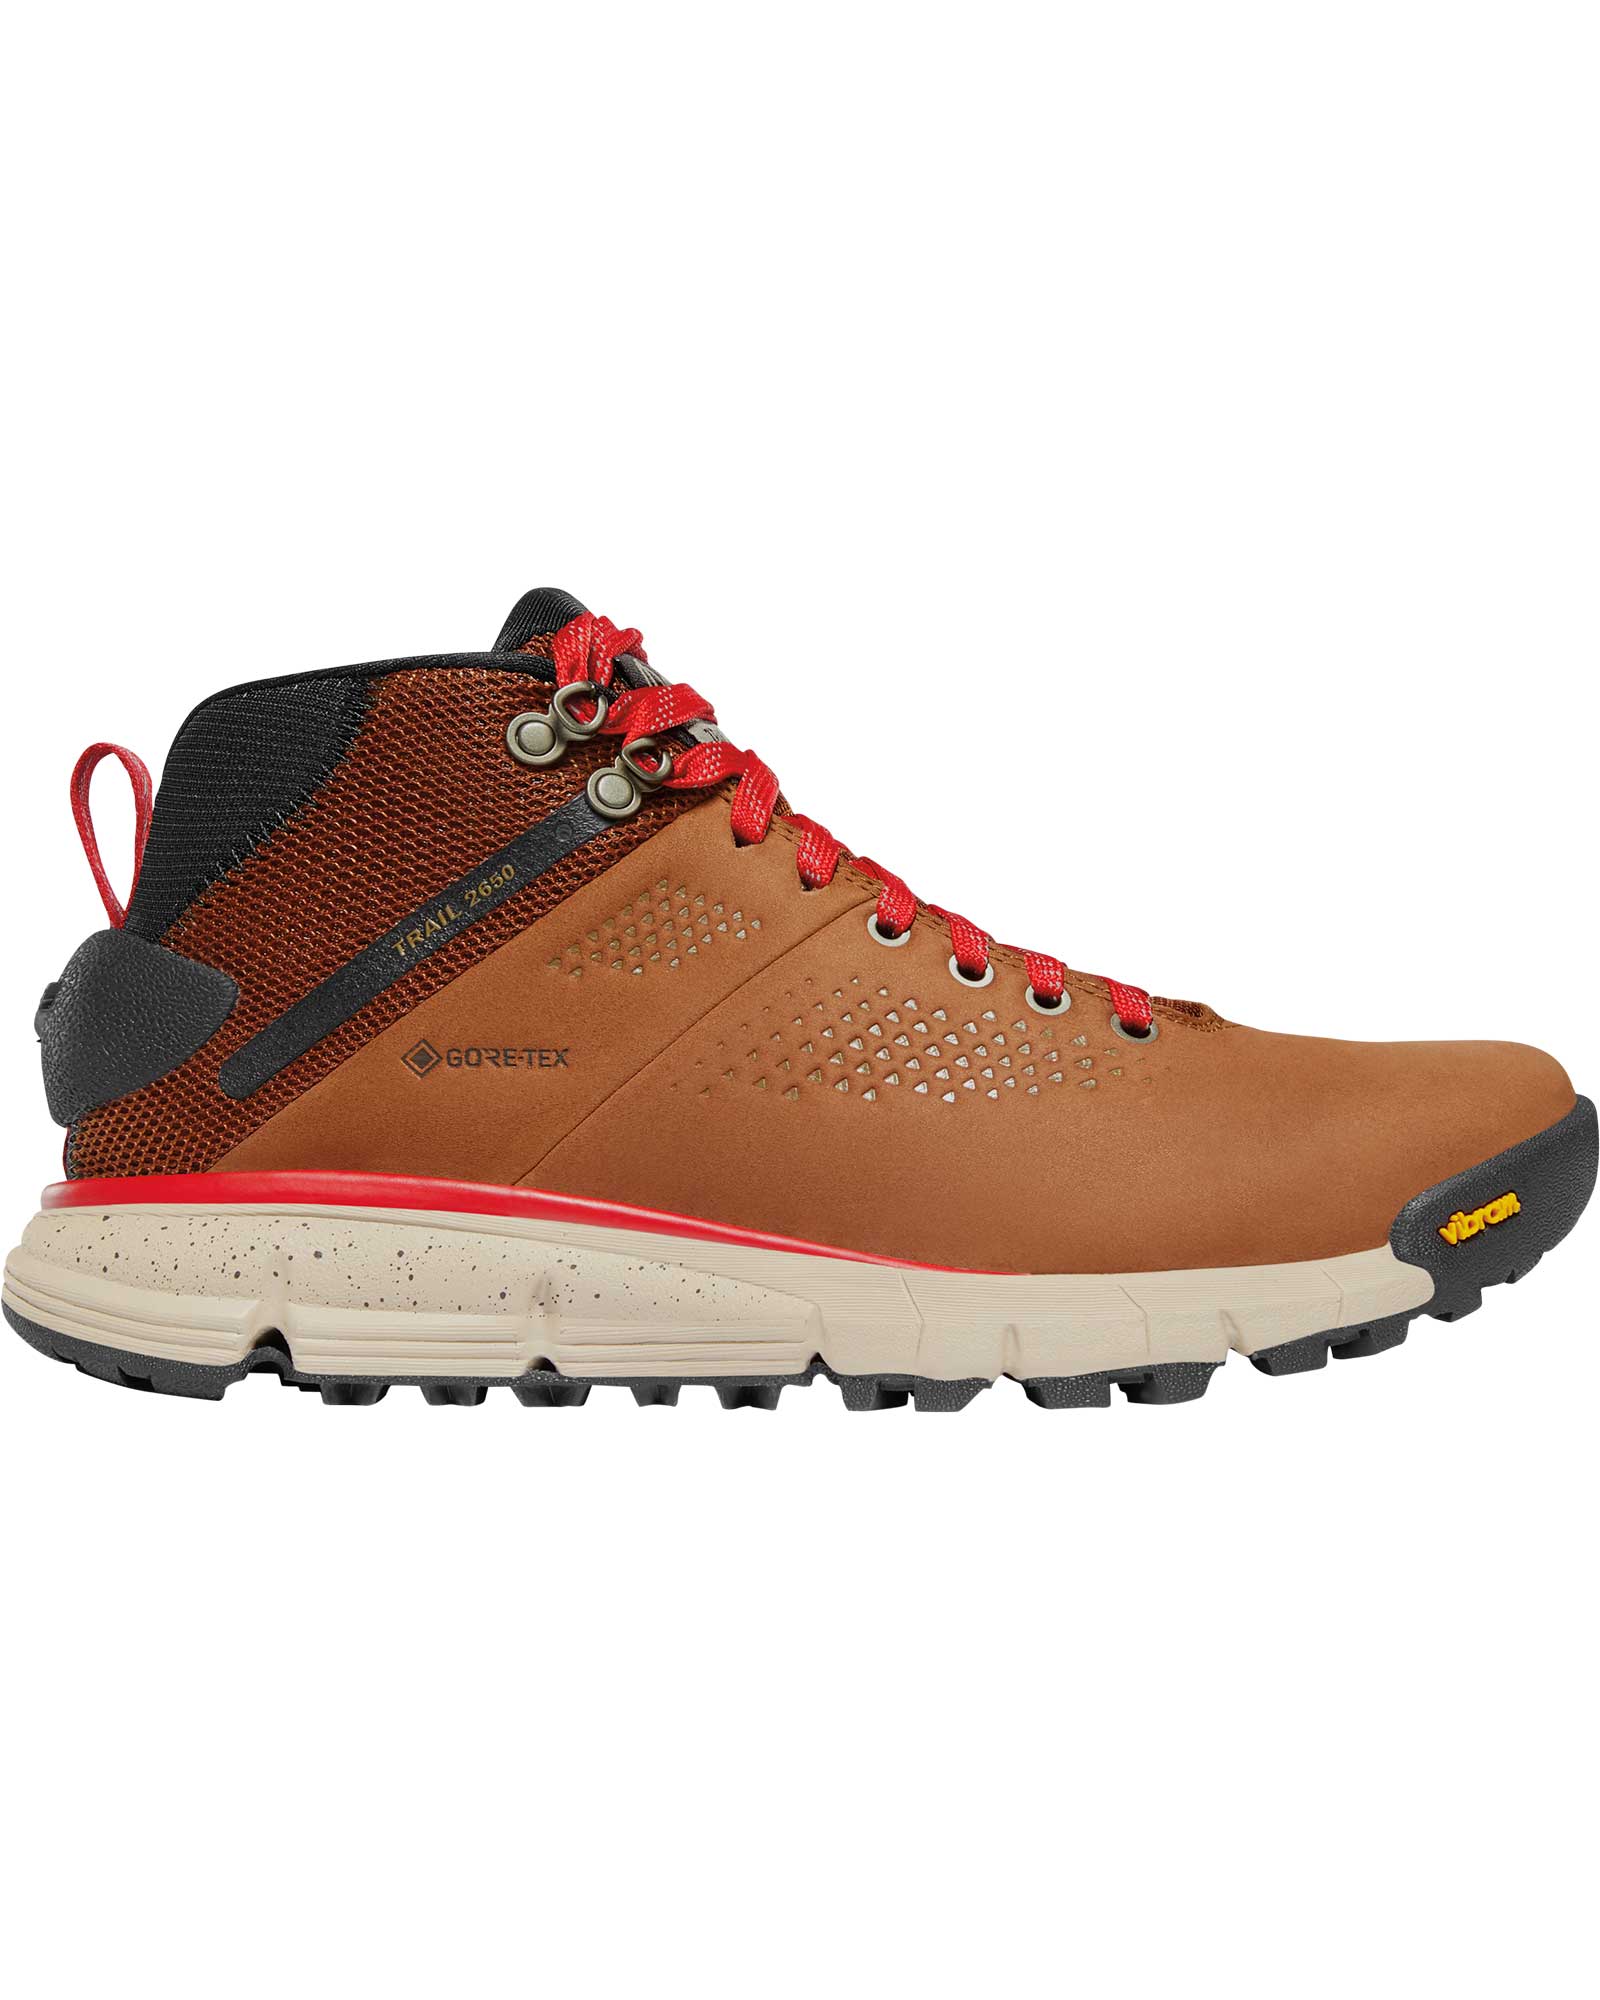 Danner Trail 2650 Mid Gore-tex Womens Boots